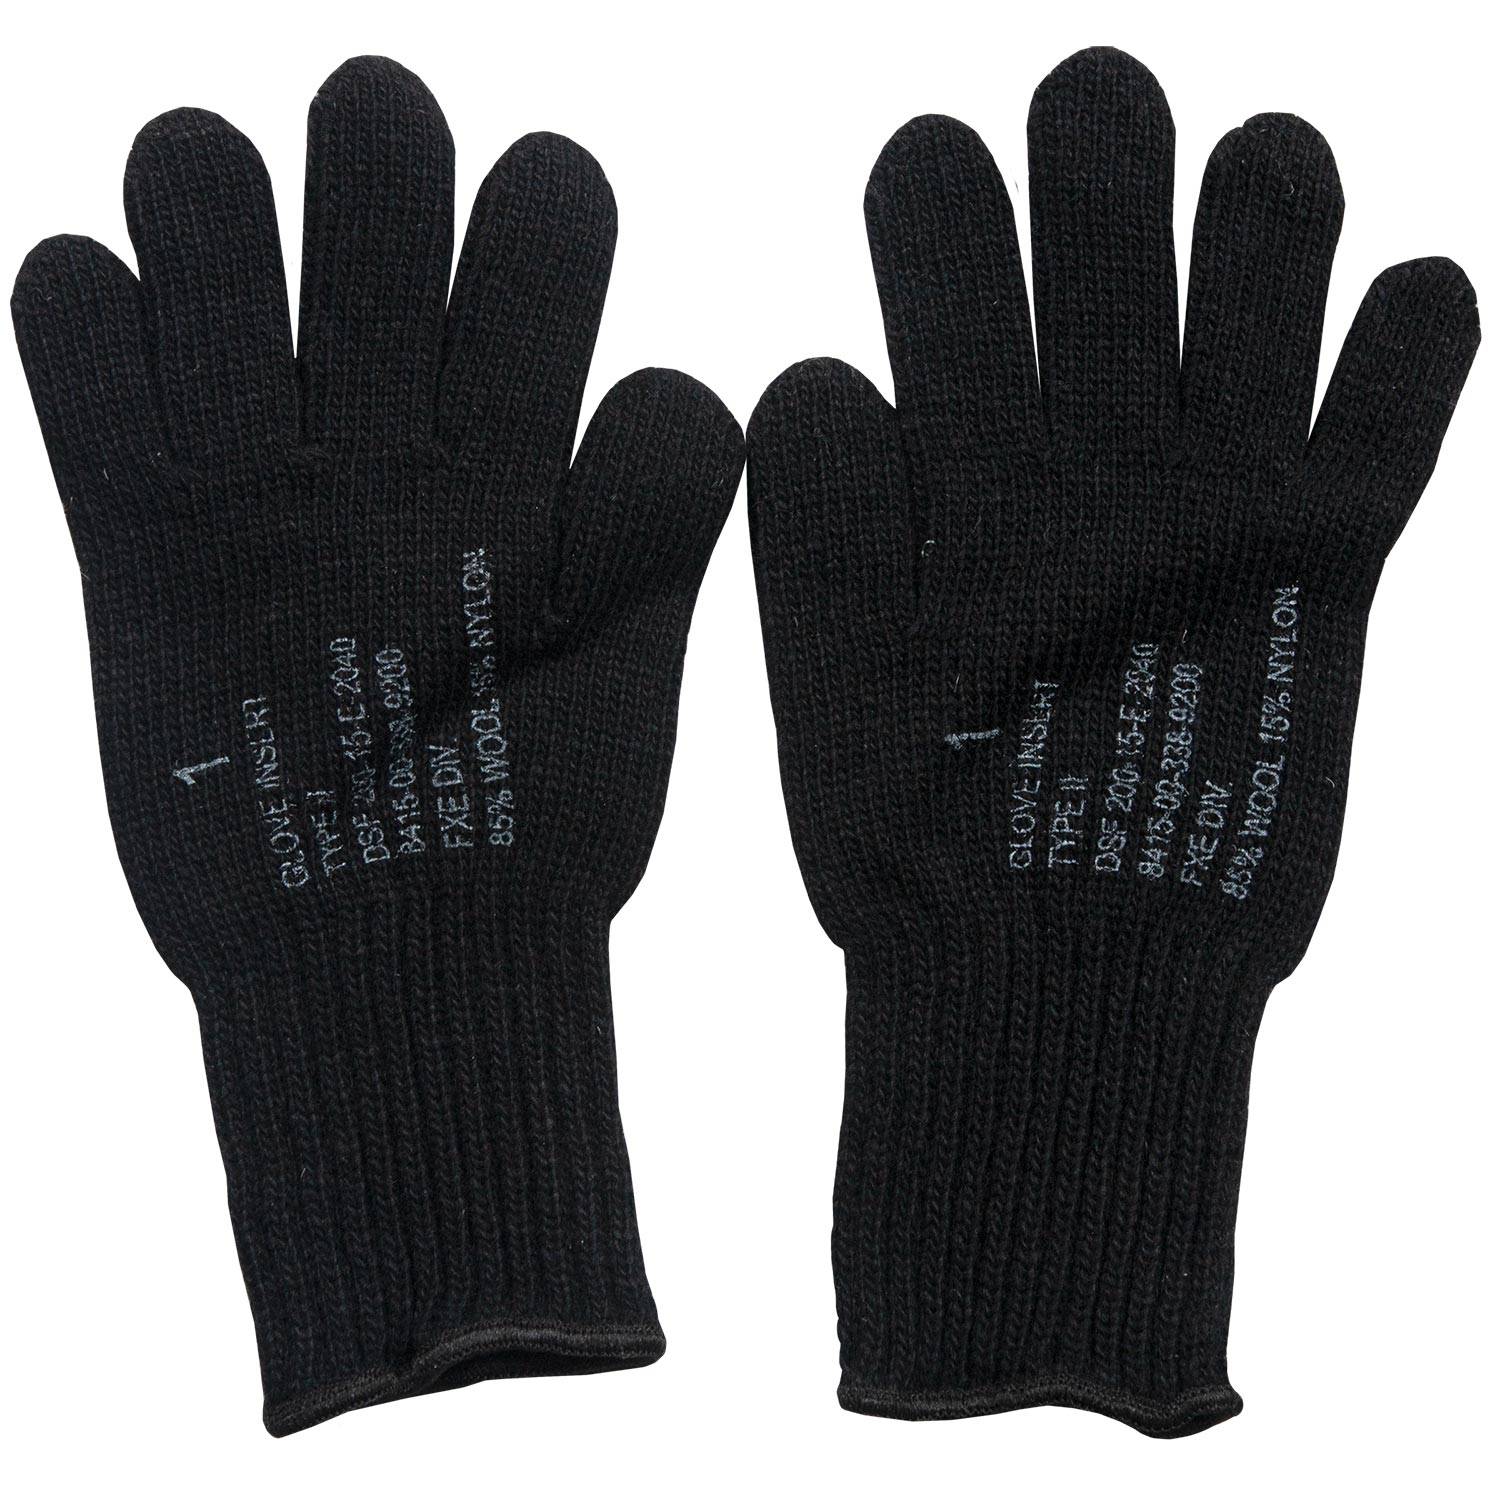 FOX TACTICAL G.I. GLOVE LINERS